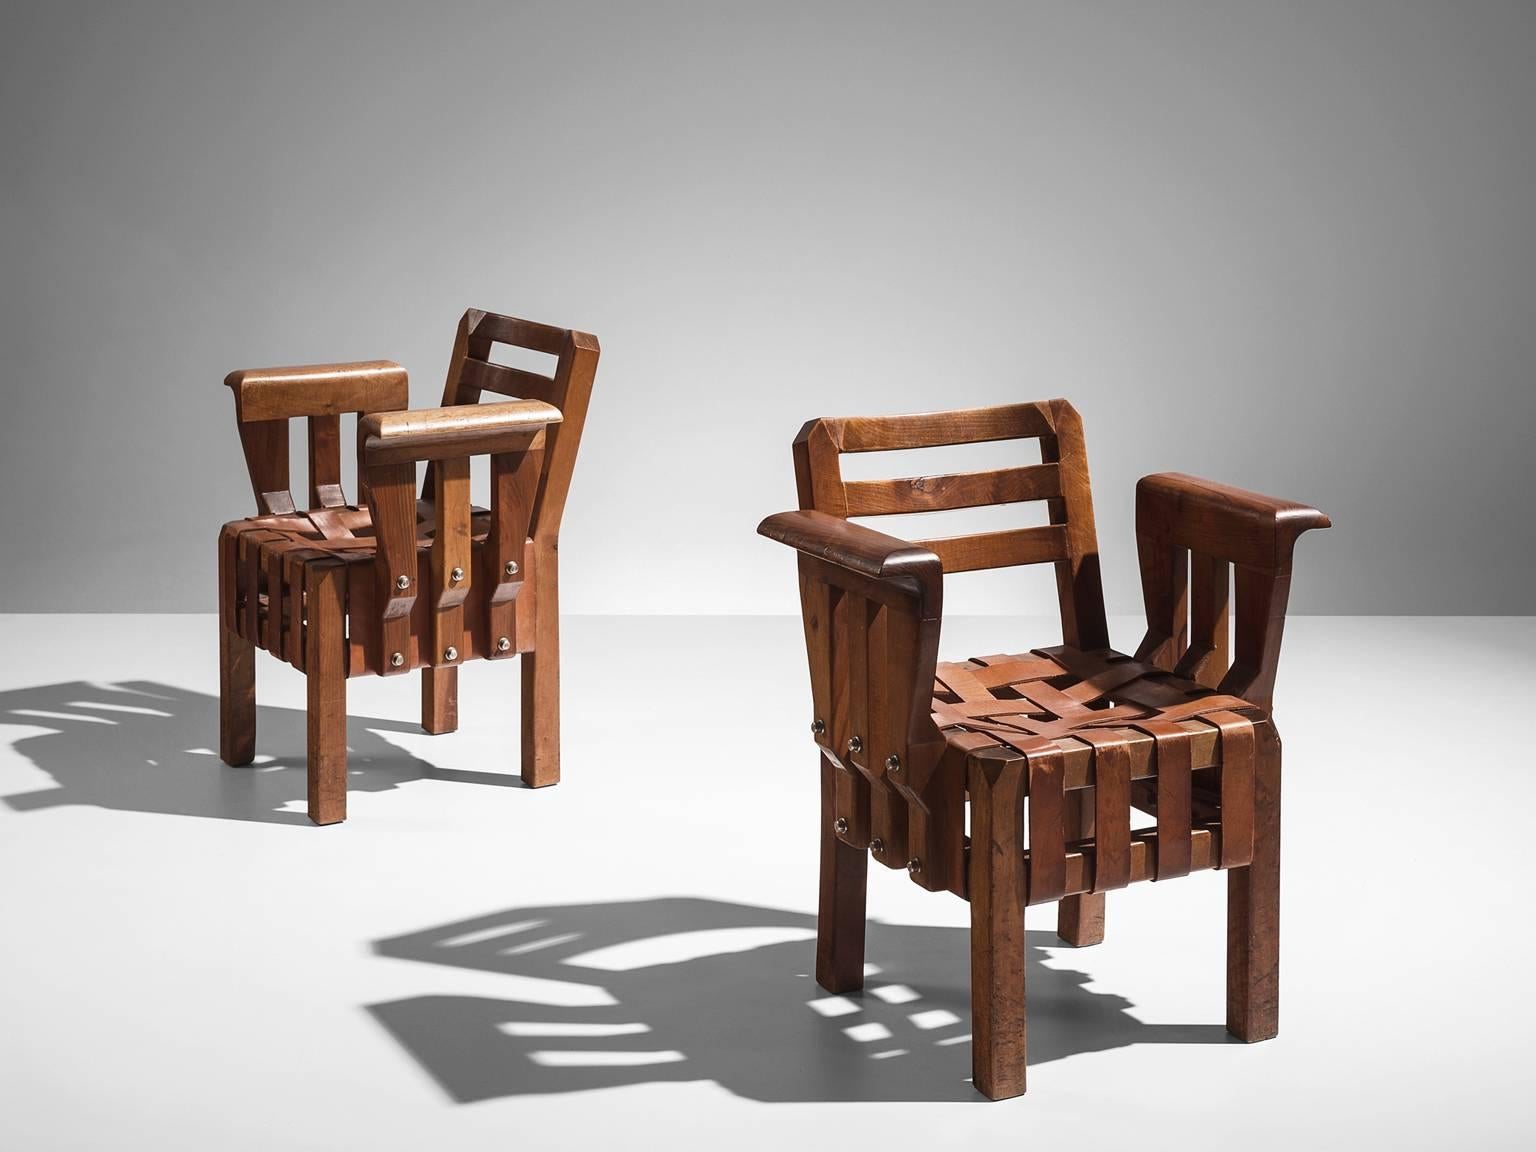 Curro Inza, set of armchairs, elm and cognac leather, Spain, 1950s.

It is hard to describe the sculptural and architectural splendor that is combined within these chairs. They are bold, structurally sound and anything but ostentatious. Moreover,